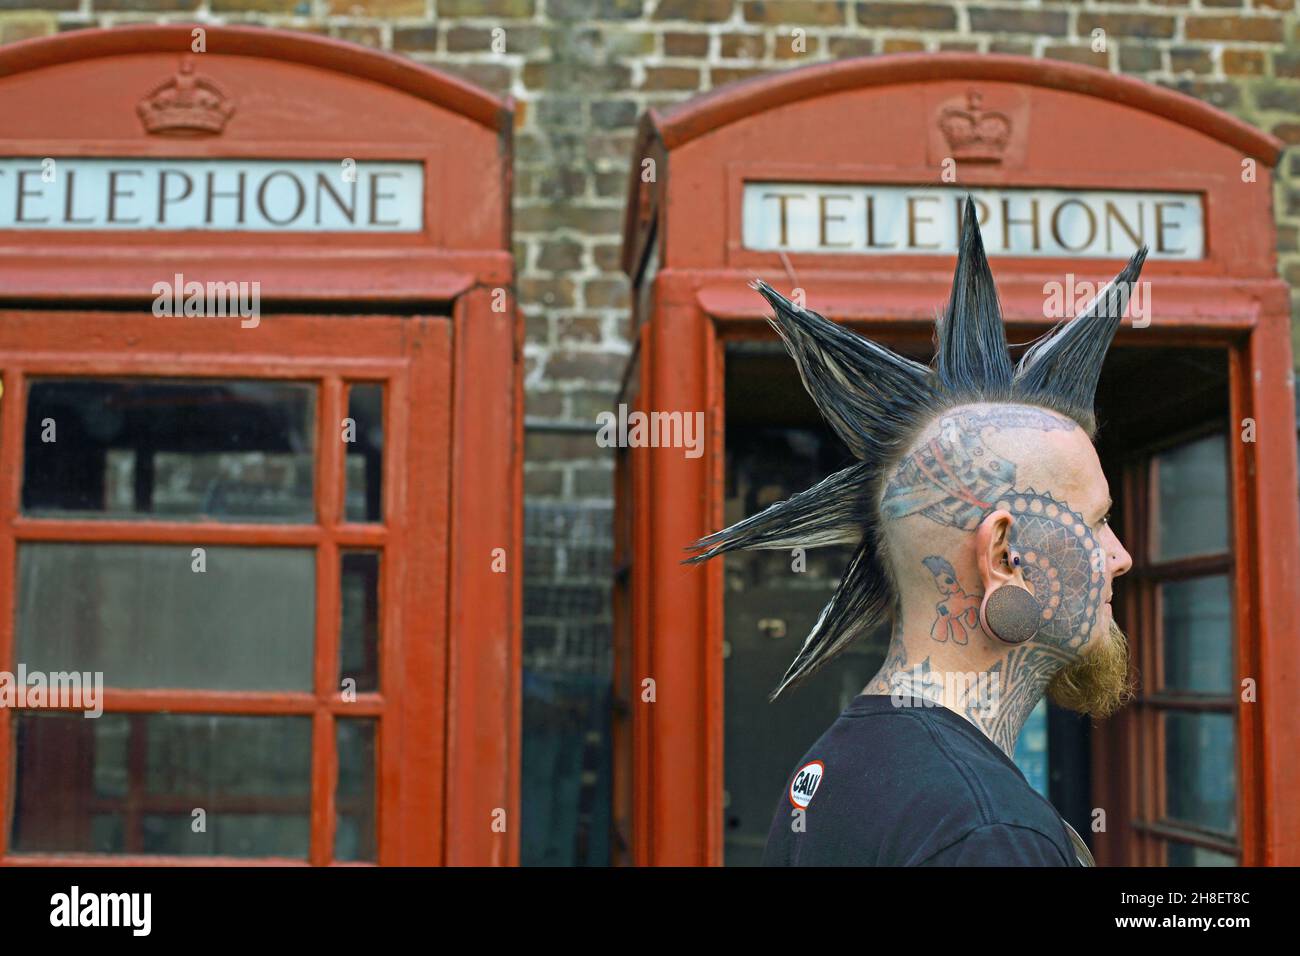 Punk with mohawk hairstyle in front of red telephone box Stock Photo